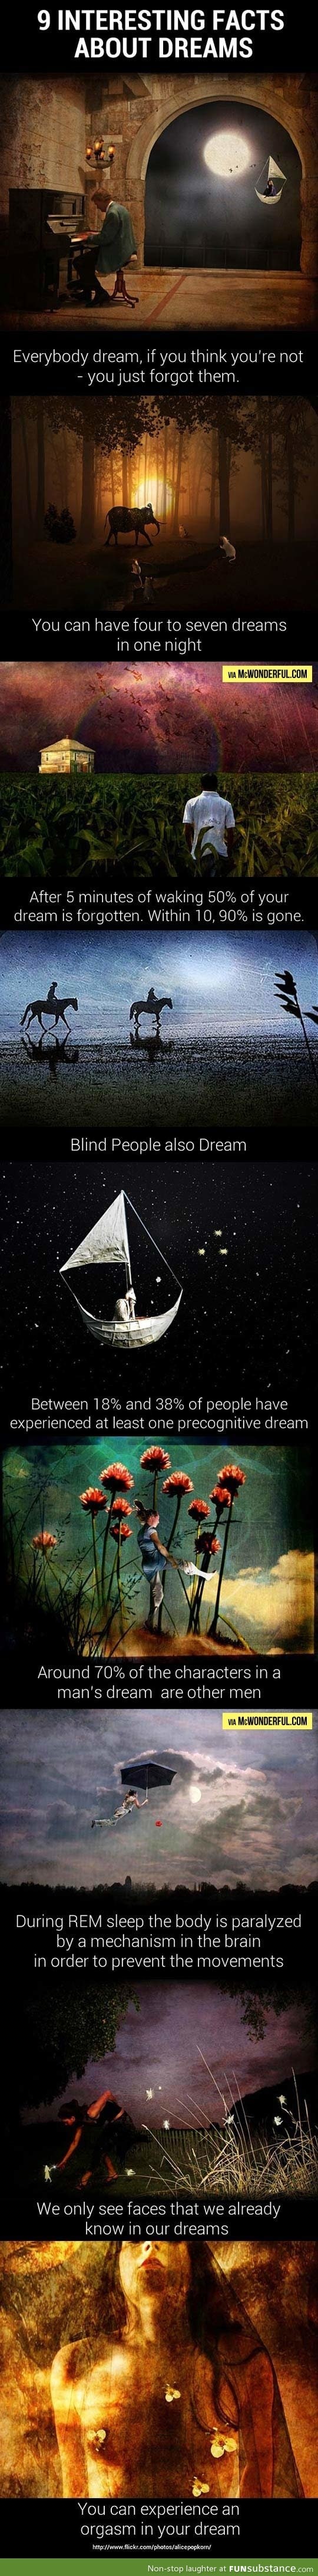 9 Cool Facts About Dreams